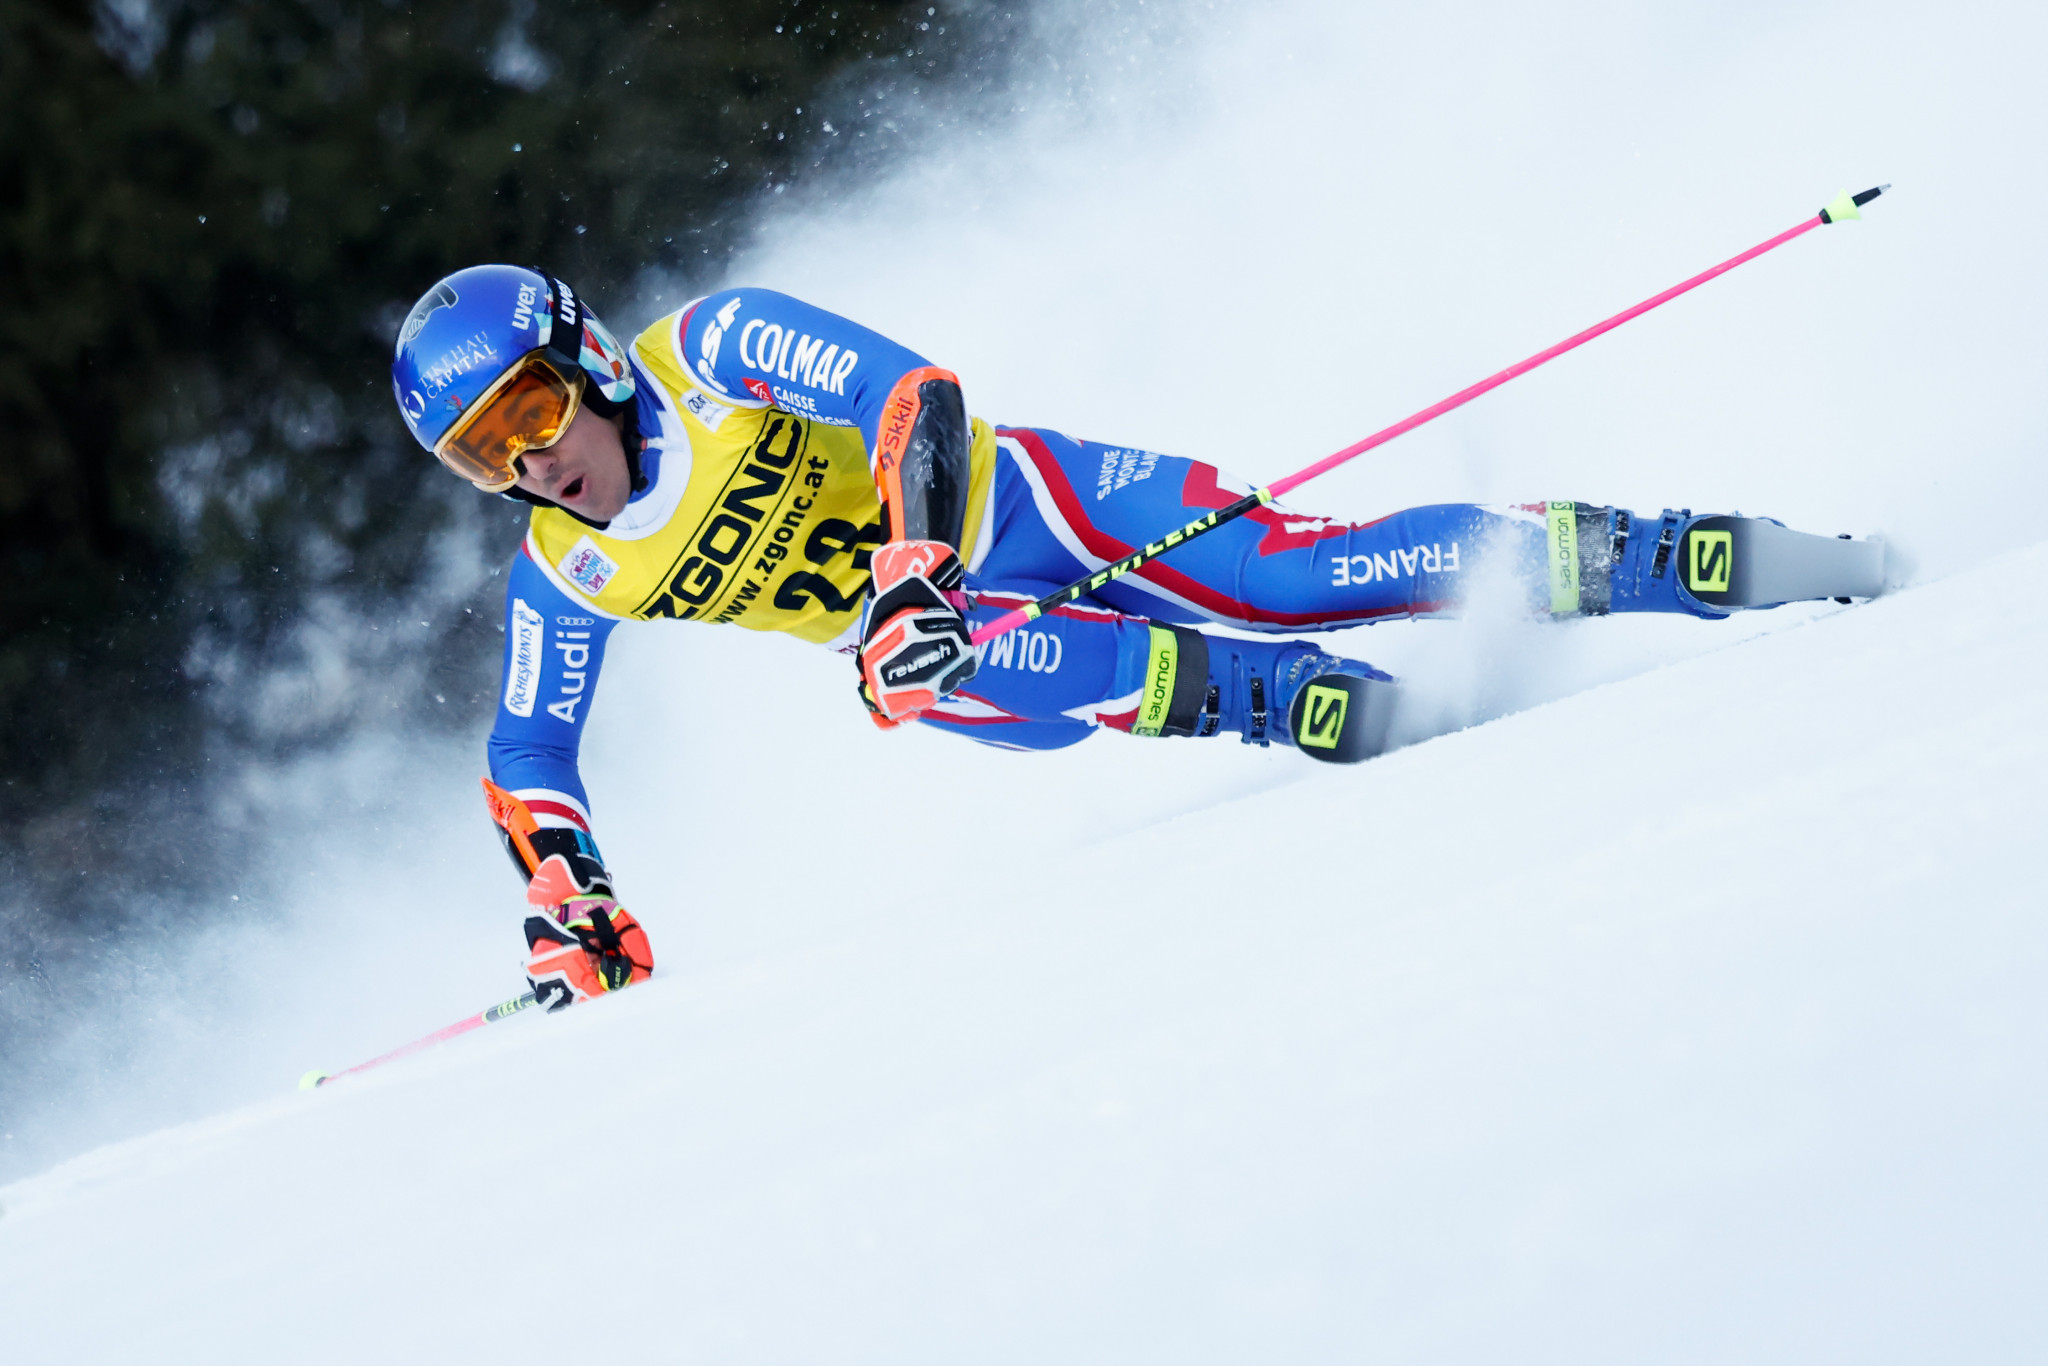 Muffat-Jeandet doubtful for Beijing 2022 after suffering broken ankle at abandoned Alpine Ski World Cup in Zagreb